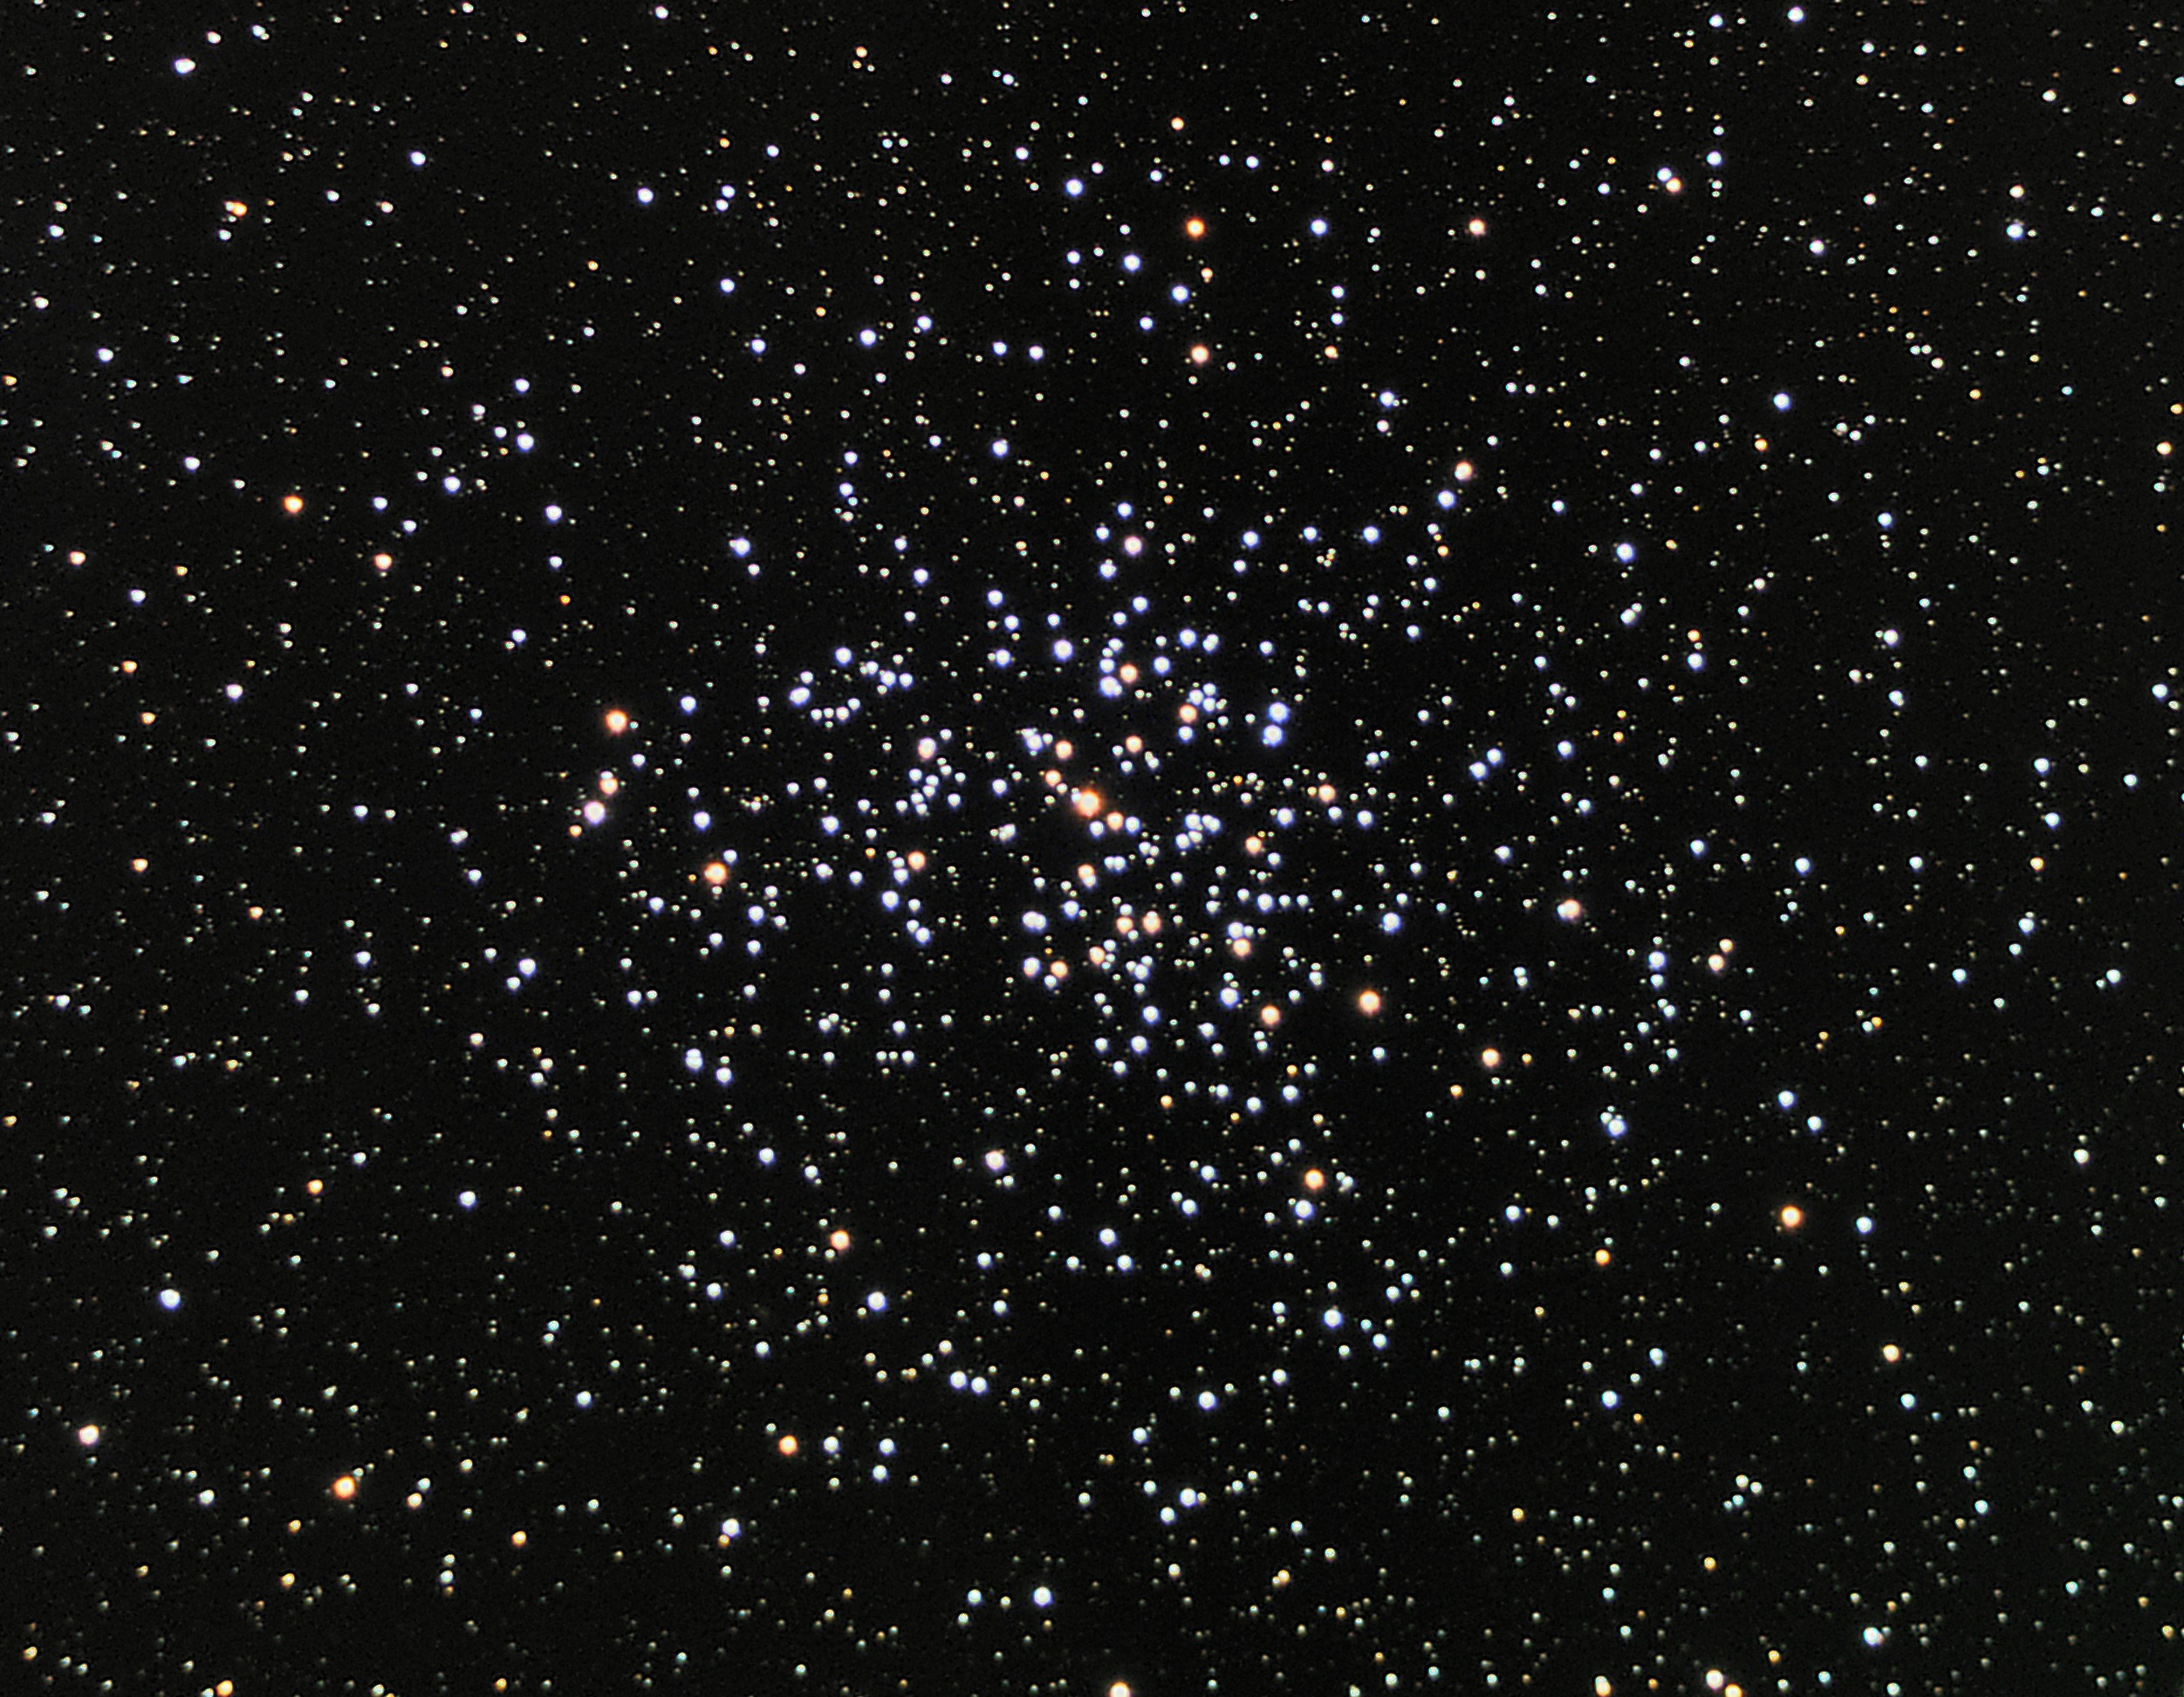 Open cluster Messier 37 in Auriga. Image Credit: Wikimedia Commons.